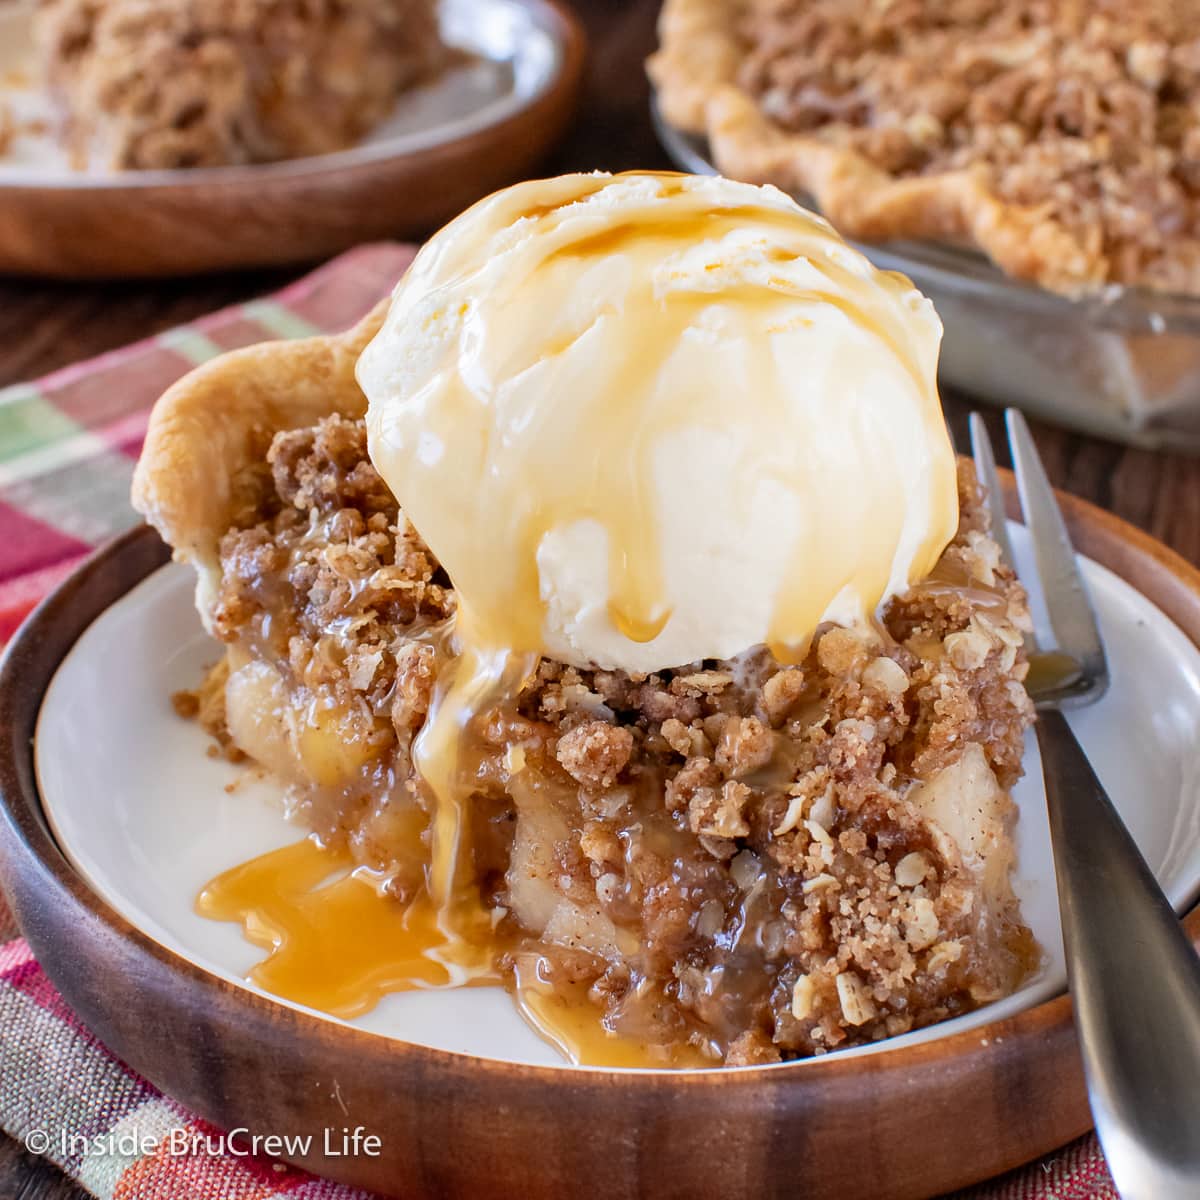 A slice of apple crumble pie topped with ice cream and caramel topping.